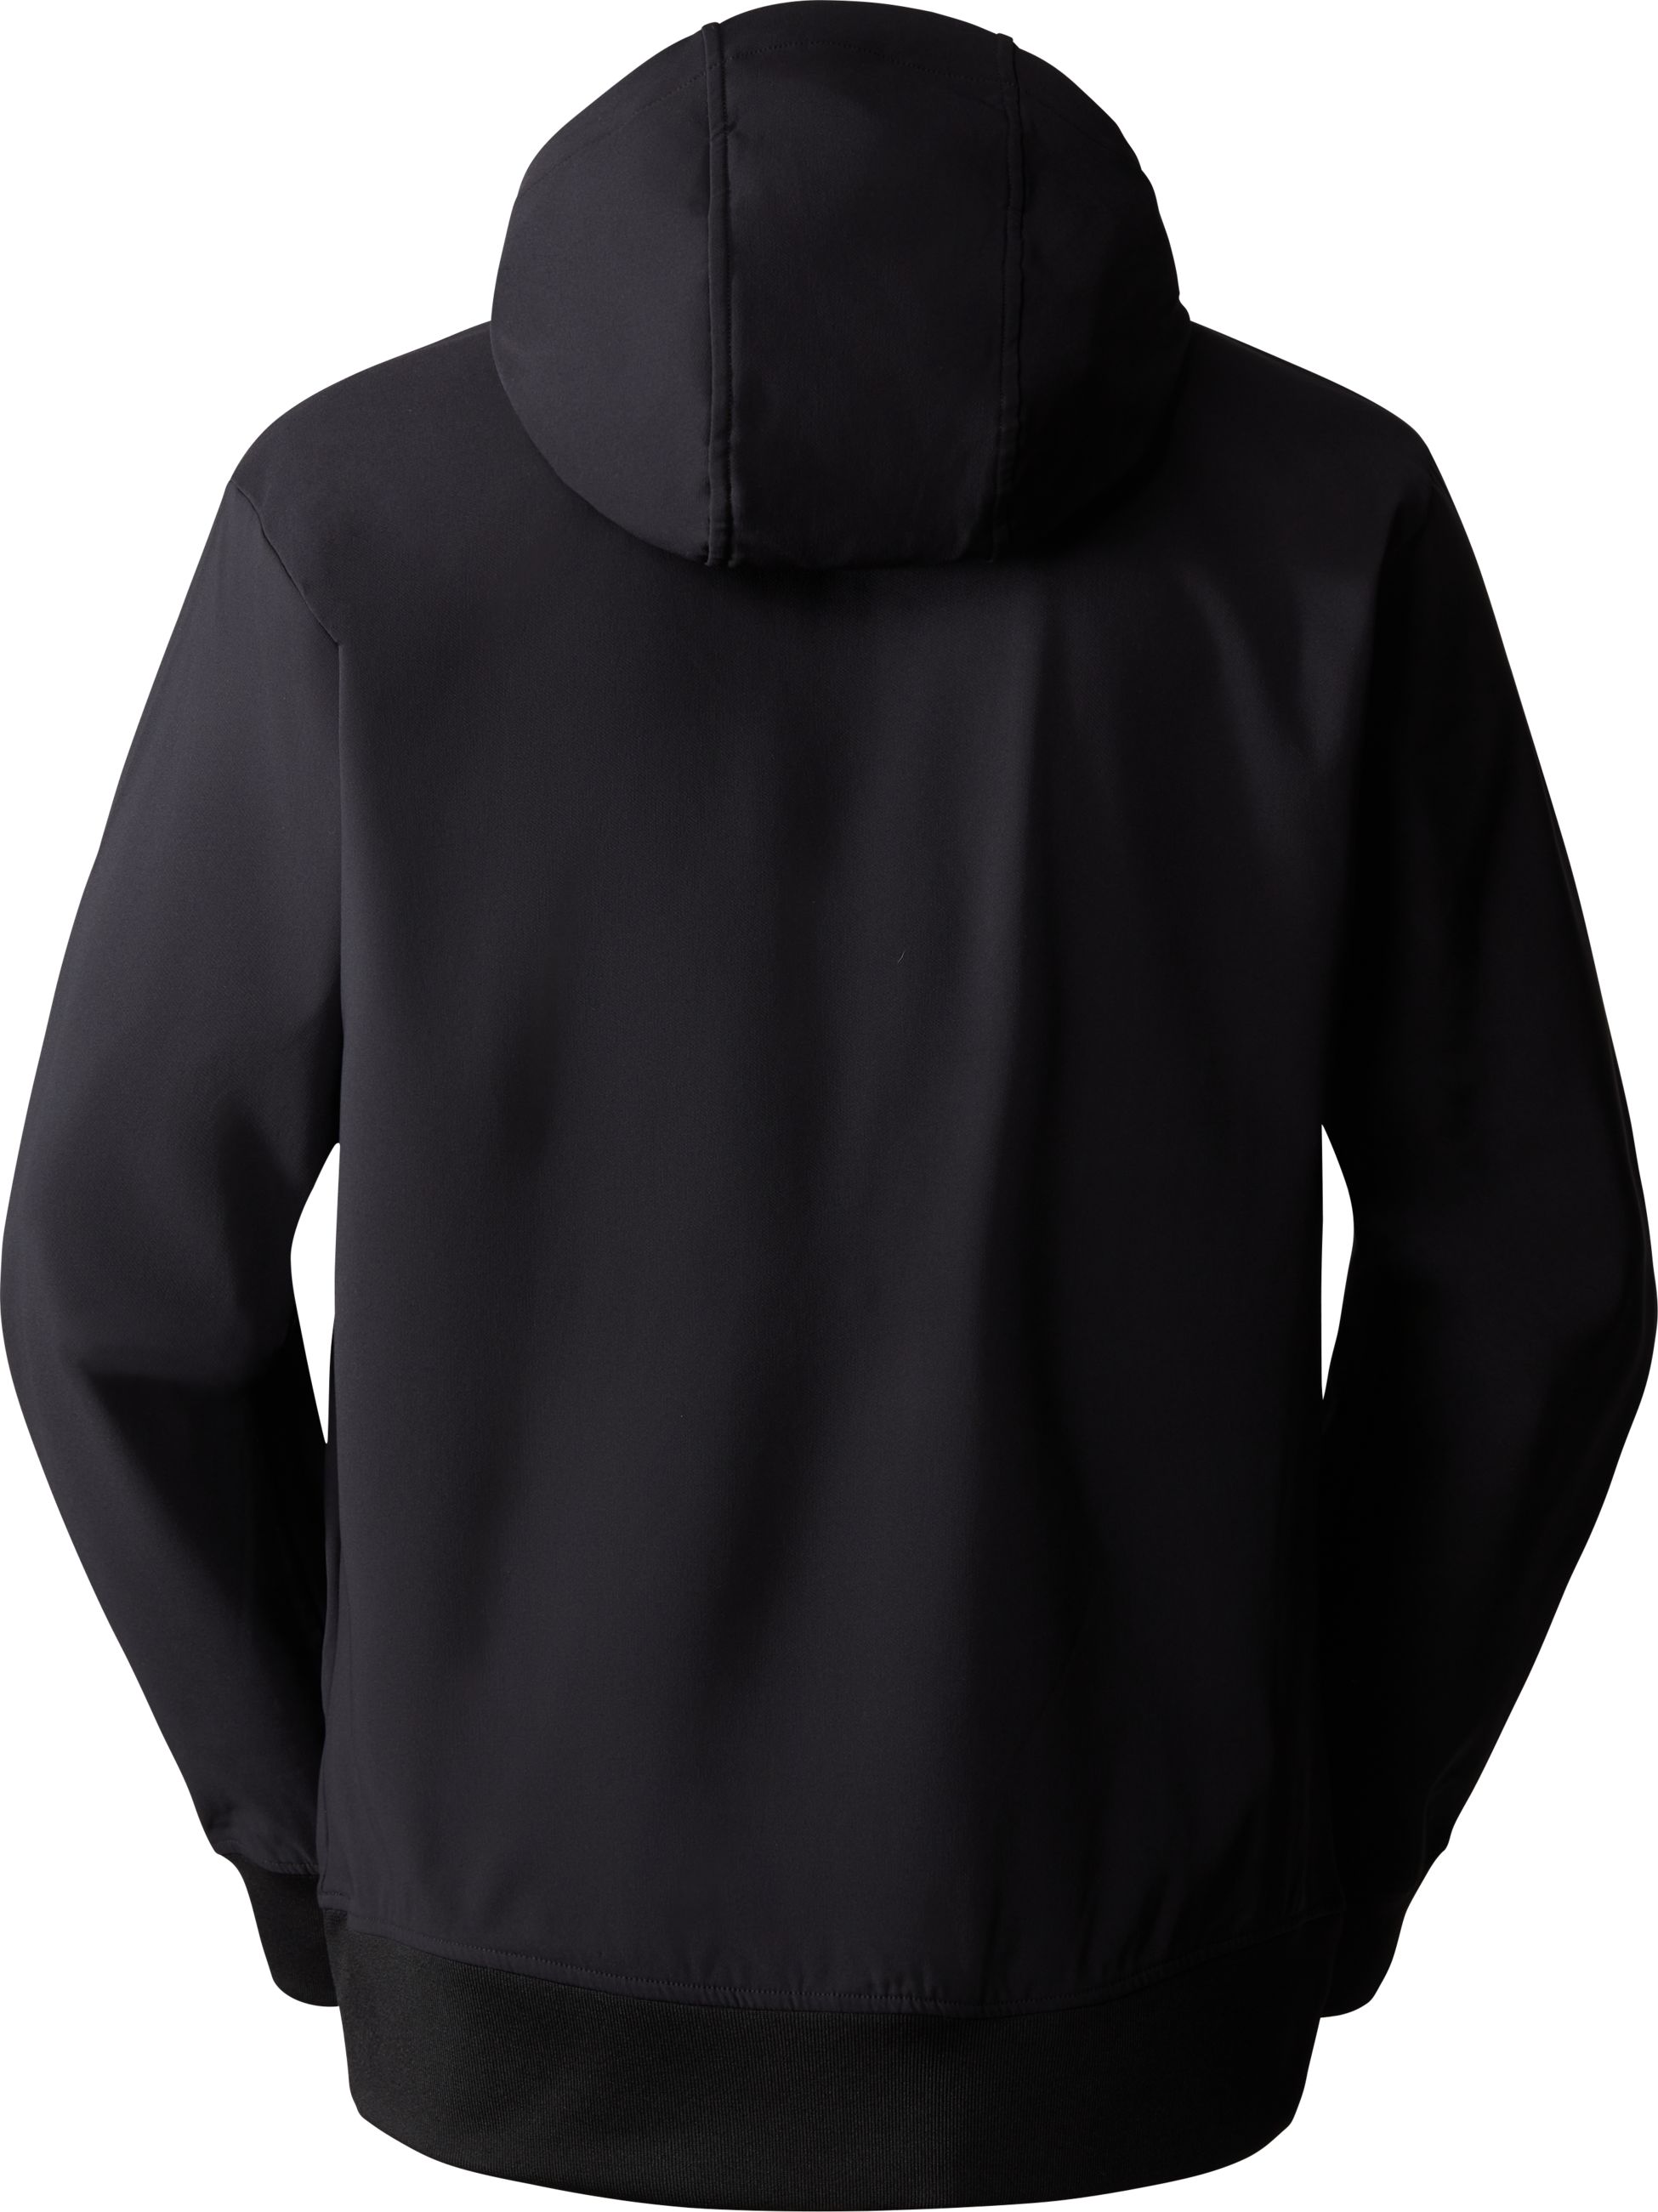 THE NORTH FACE, M TEKNO LOGO HOODIE